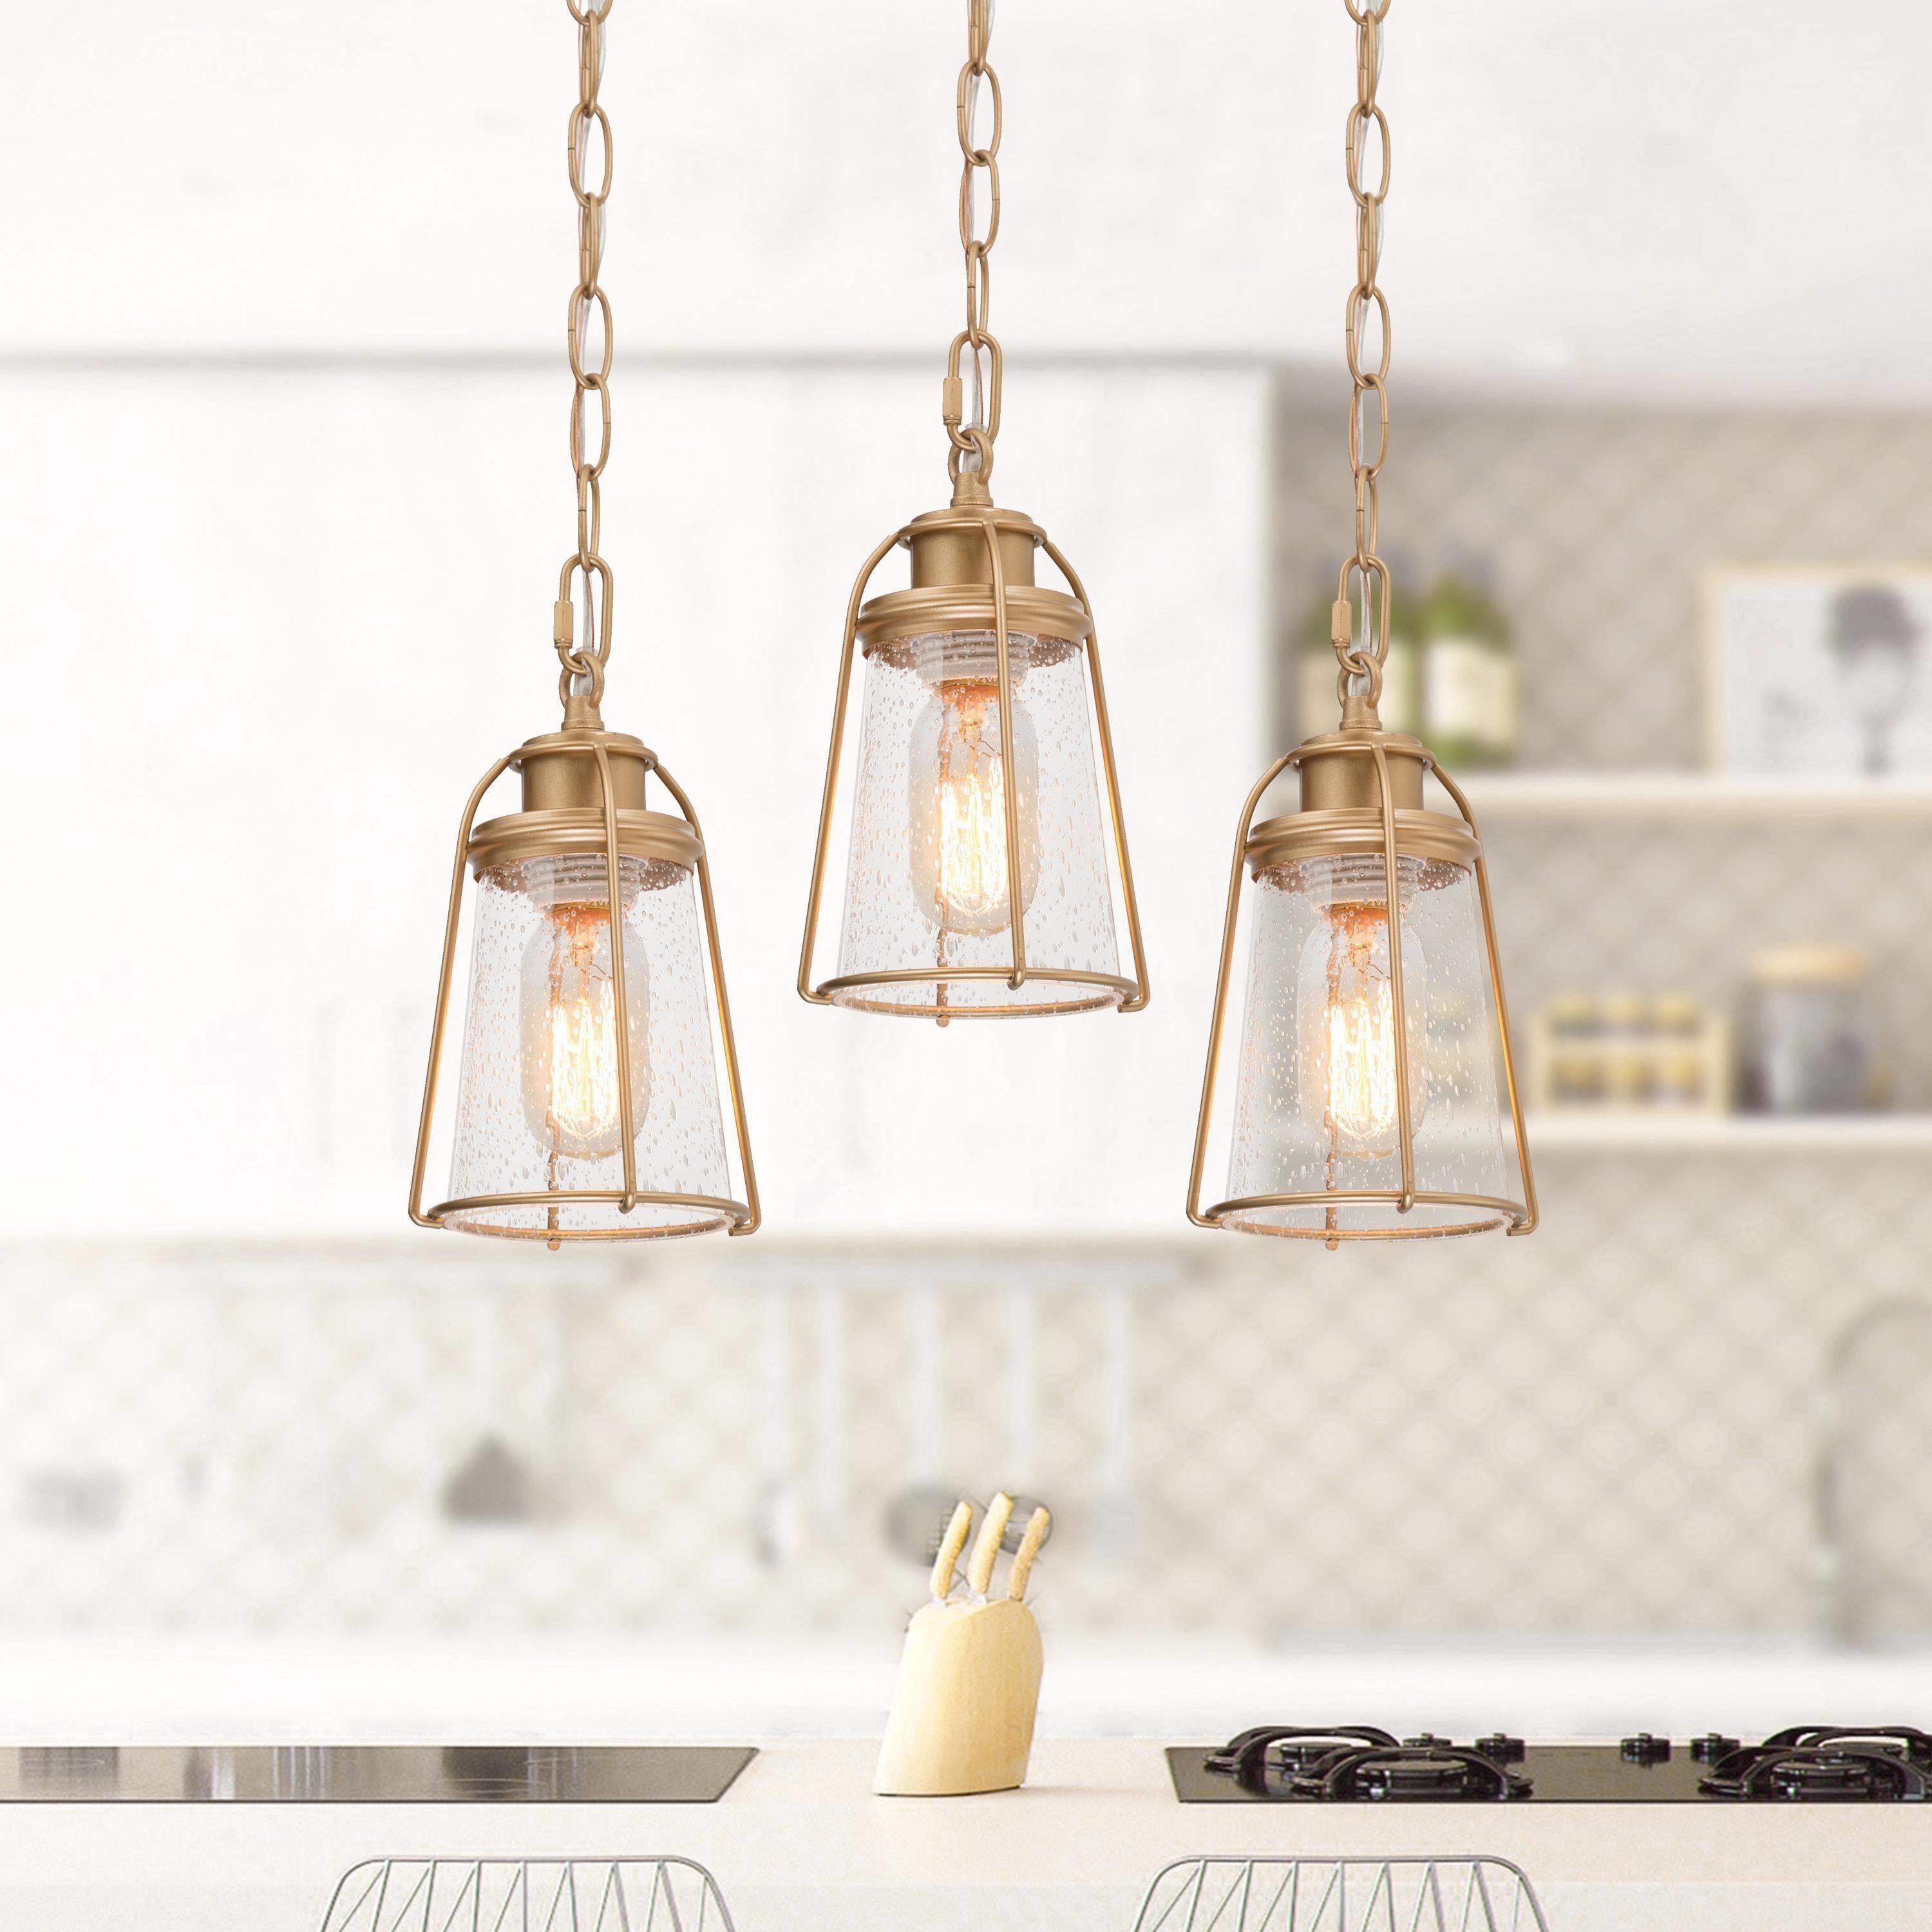 Seeded LED Uolfin Kitchen Glass Mini Matte Lighting and Modern/Contemporary Pendant Island Glass department at Shade Lantern Hanging in Light the Seeded Gold